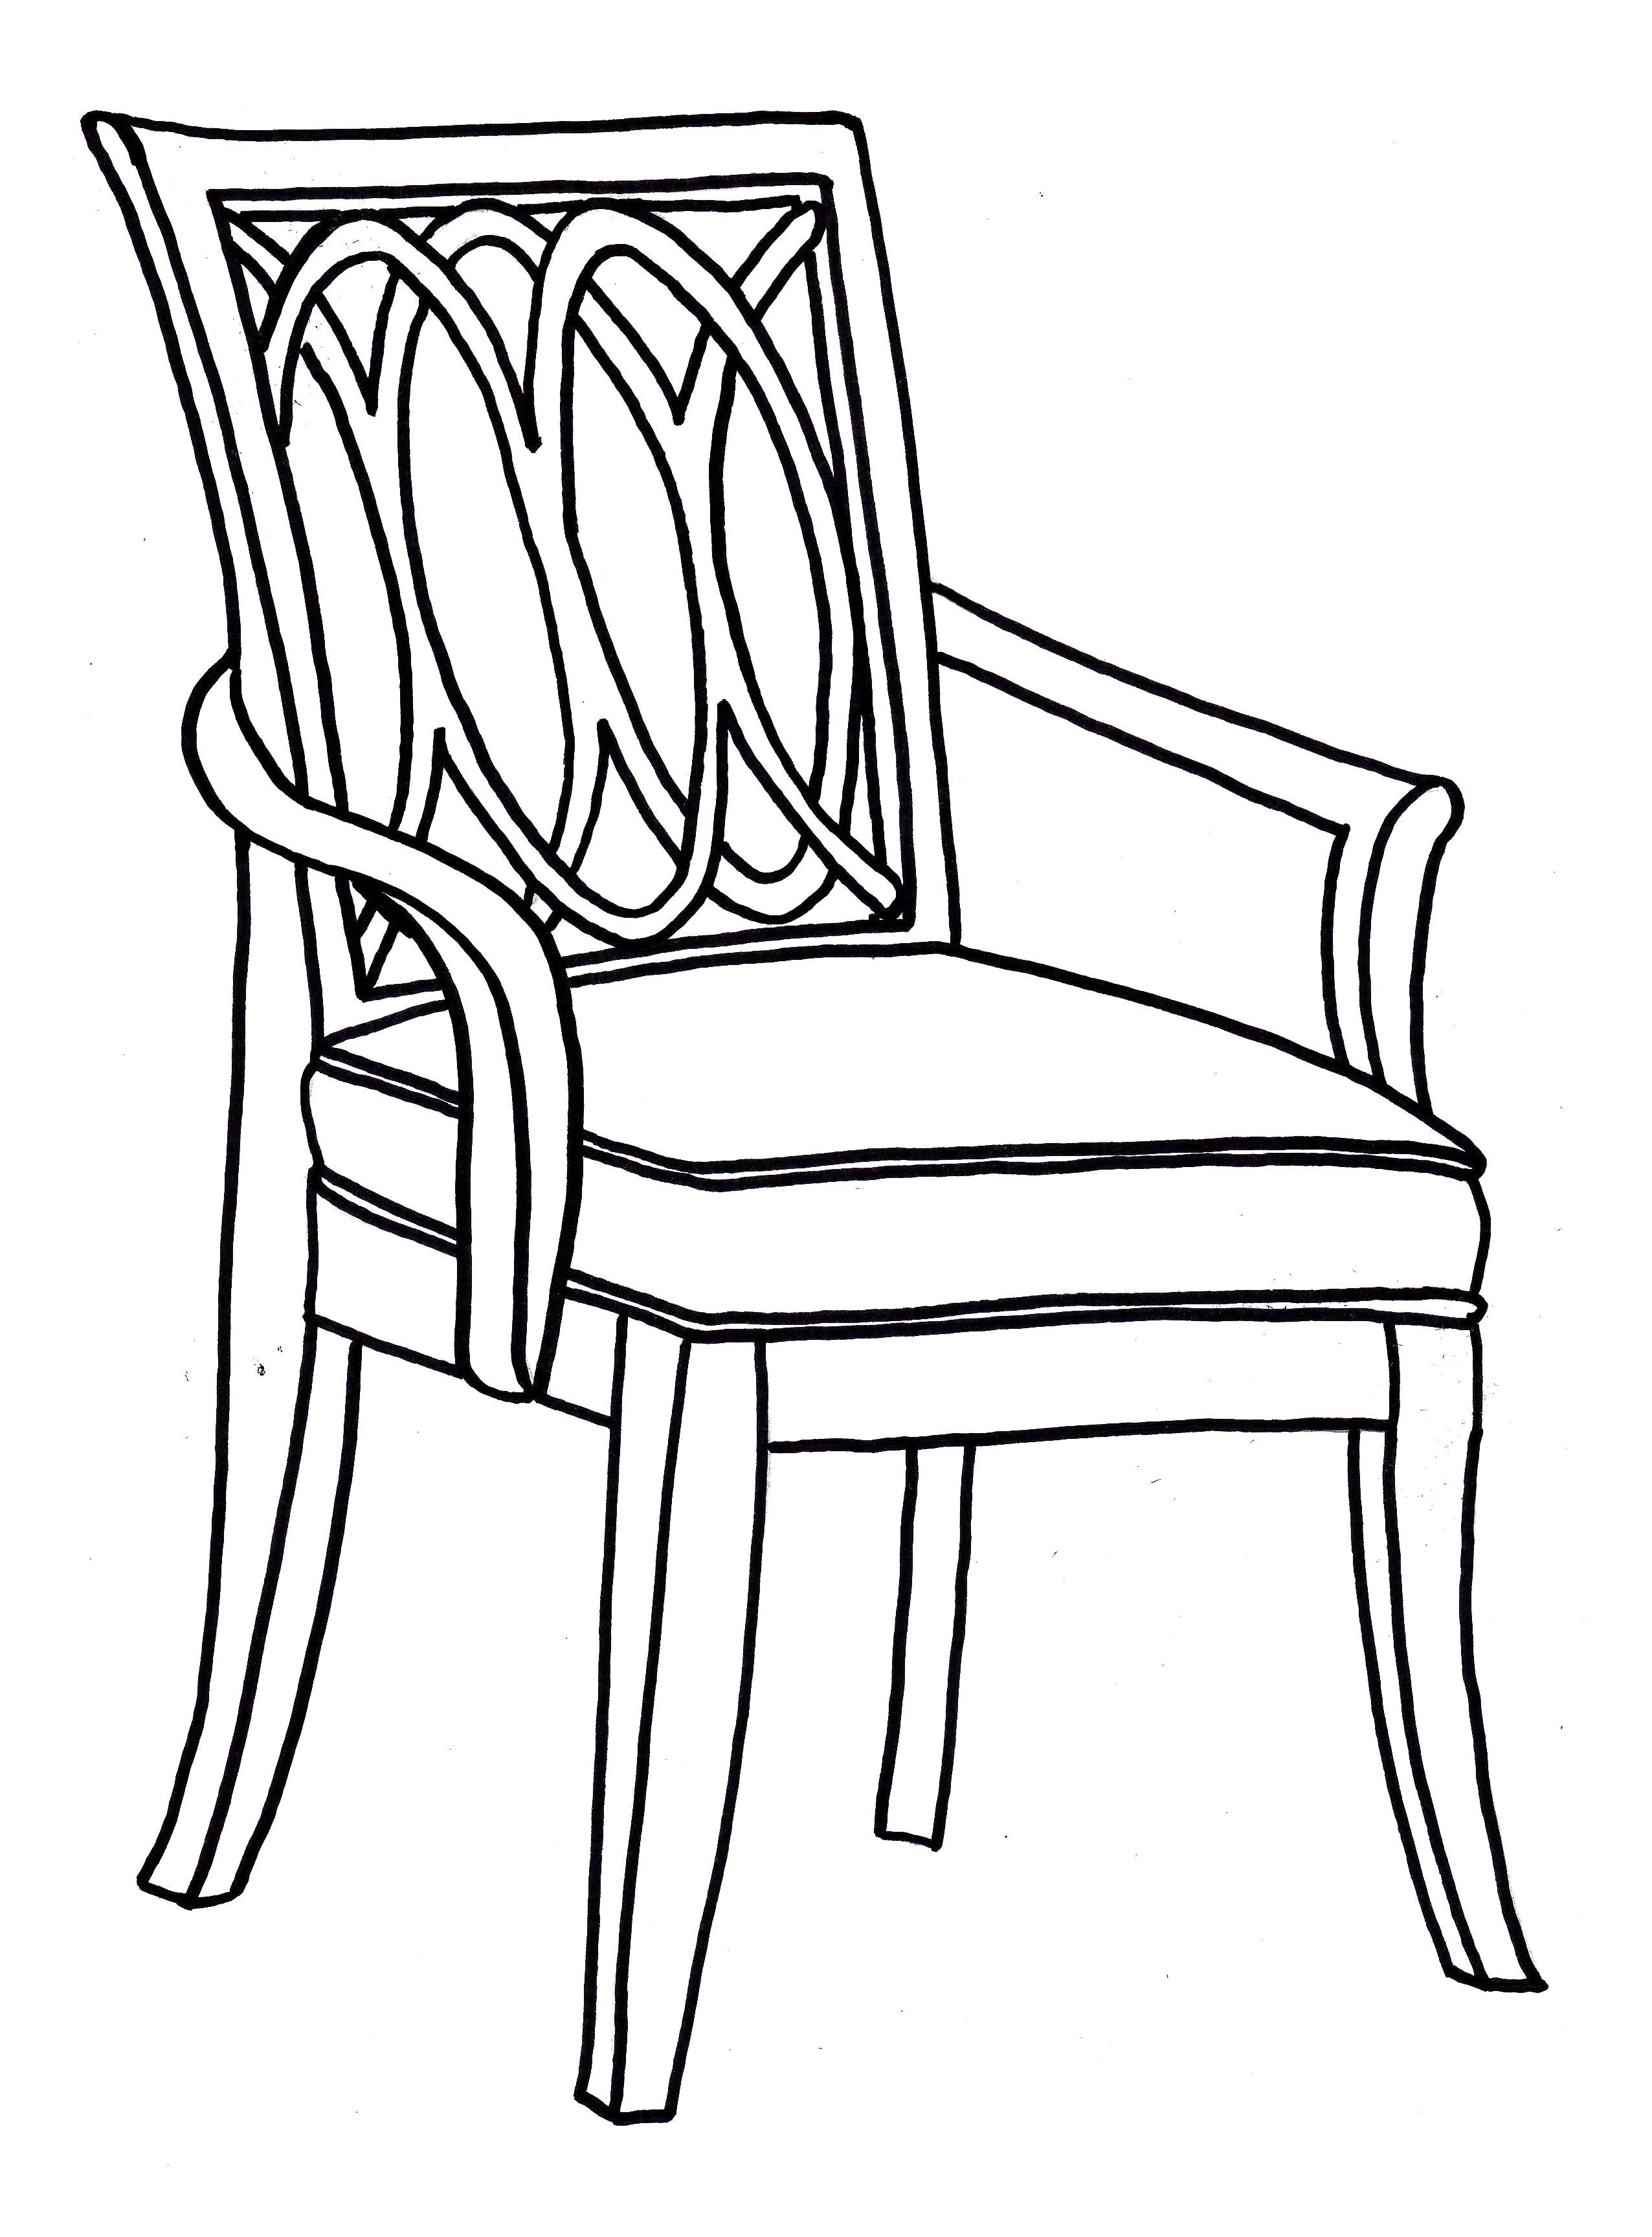 A line drawing of a dining room chair